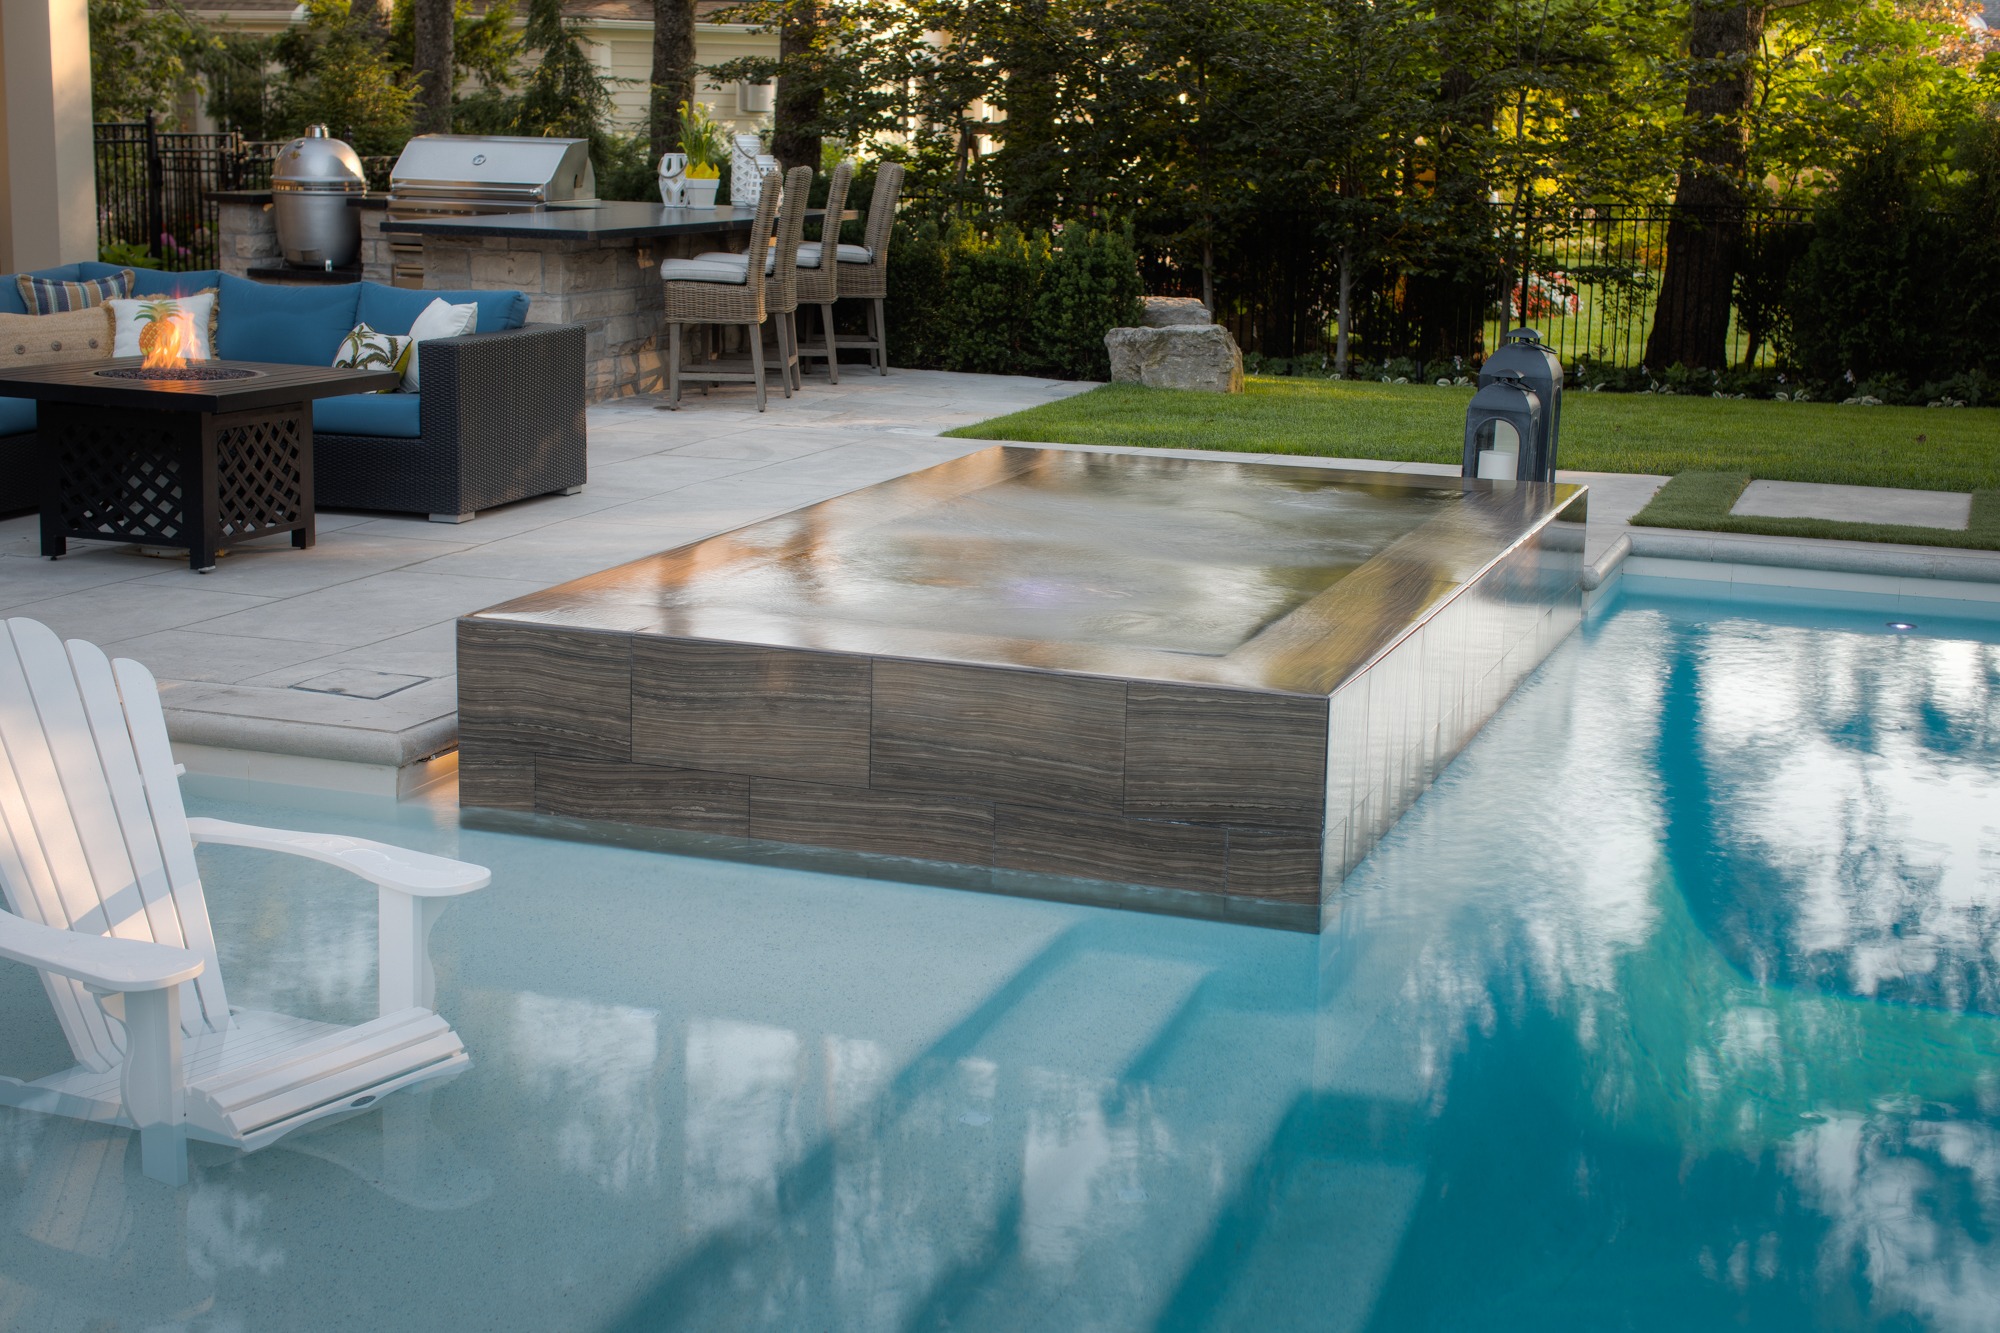 An outdoor residential setting featuring a pool with an integrated hot tub, surrounded by a patio with seating, a fire pit, and a grill area.